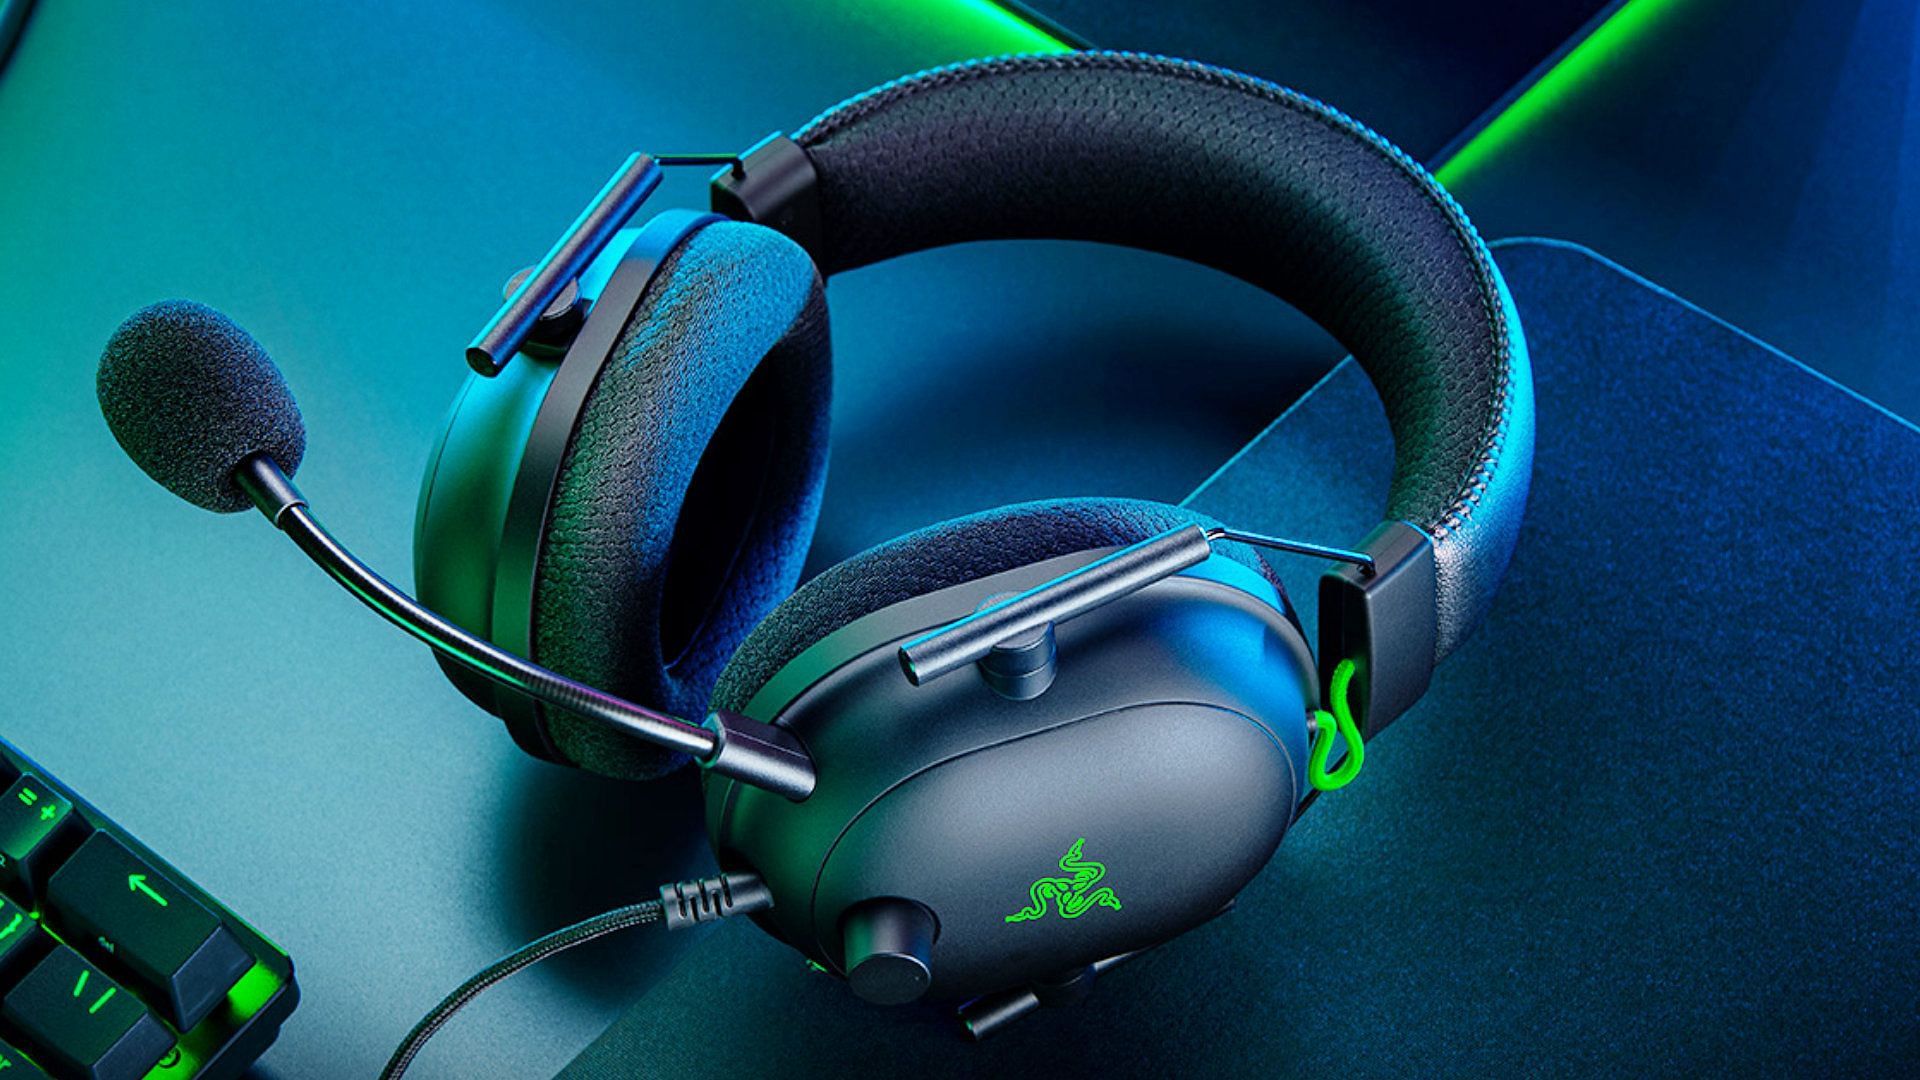 headset with an extendable microphone(Image via Razer)